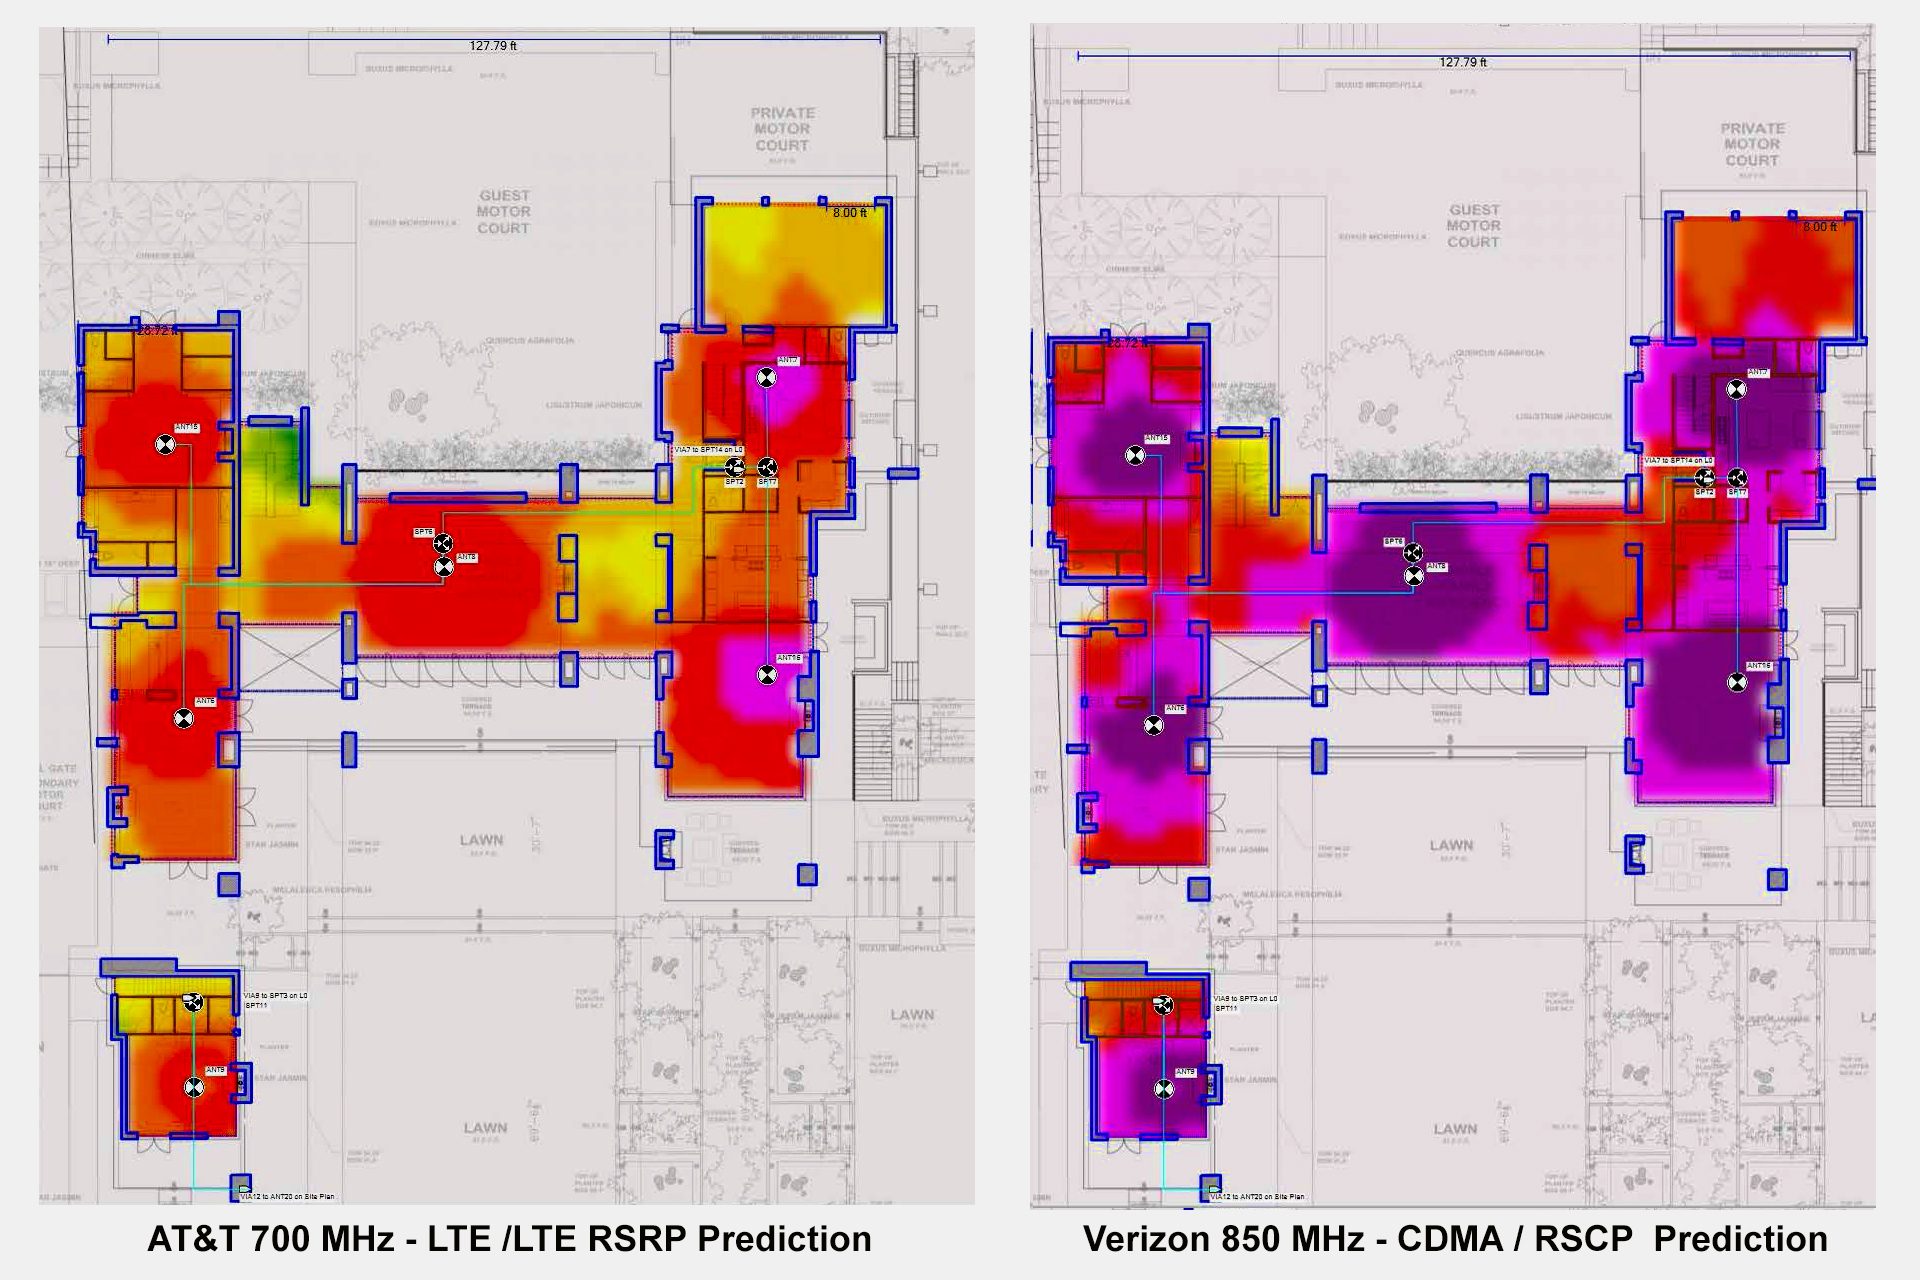 Engineered designs are based on heat maps rendered on architectural plans.  With construction materials marked onto architectural plans, iBwave software will reflect singnal strengths generated  per carrier signal band once all devices are tweaked in the final configuration.  Above is a rendition of generated signals for two Verizon and AT&T signal groups based on placements shown for antennas, indicating consistent coverage throughout the space.